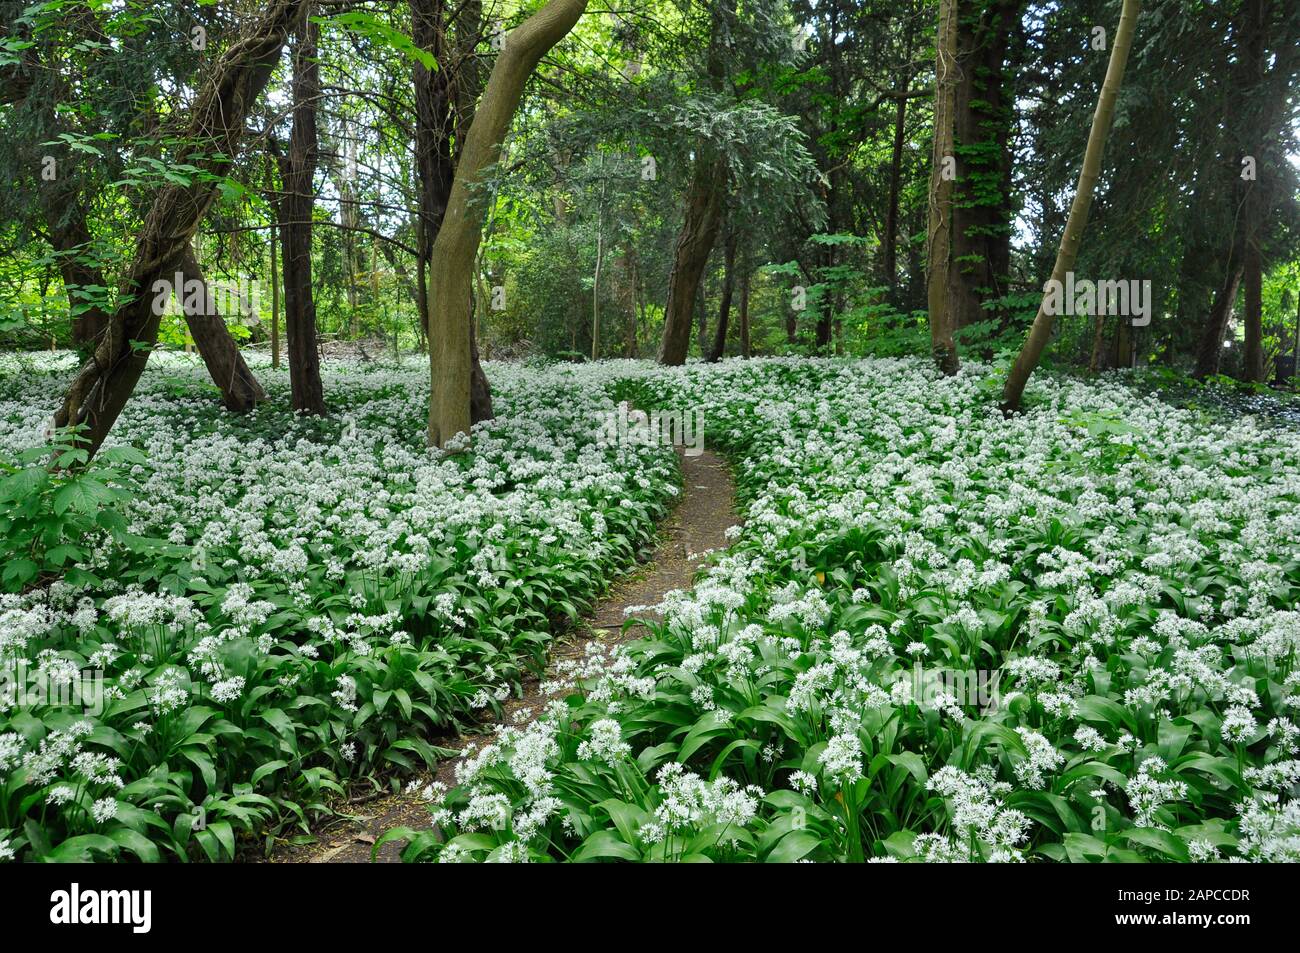 Ransoms,(Allium ursinum),also known as wild garlic, buckrams, broad-leaved garlic and wood garlic flowering under the trees in a small wood in the cen Stock Photo